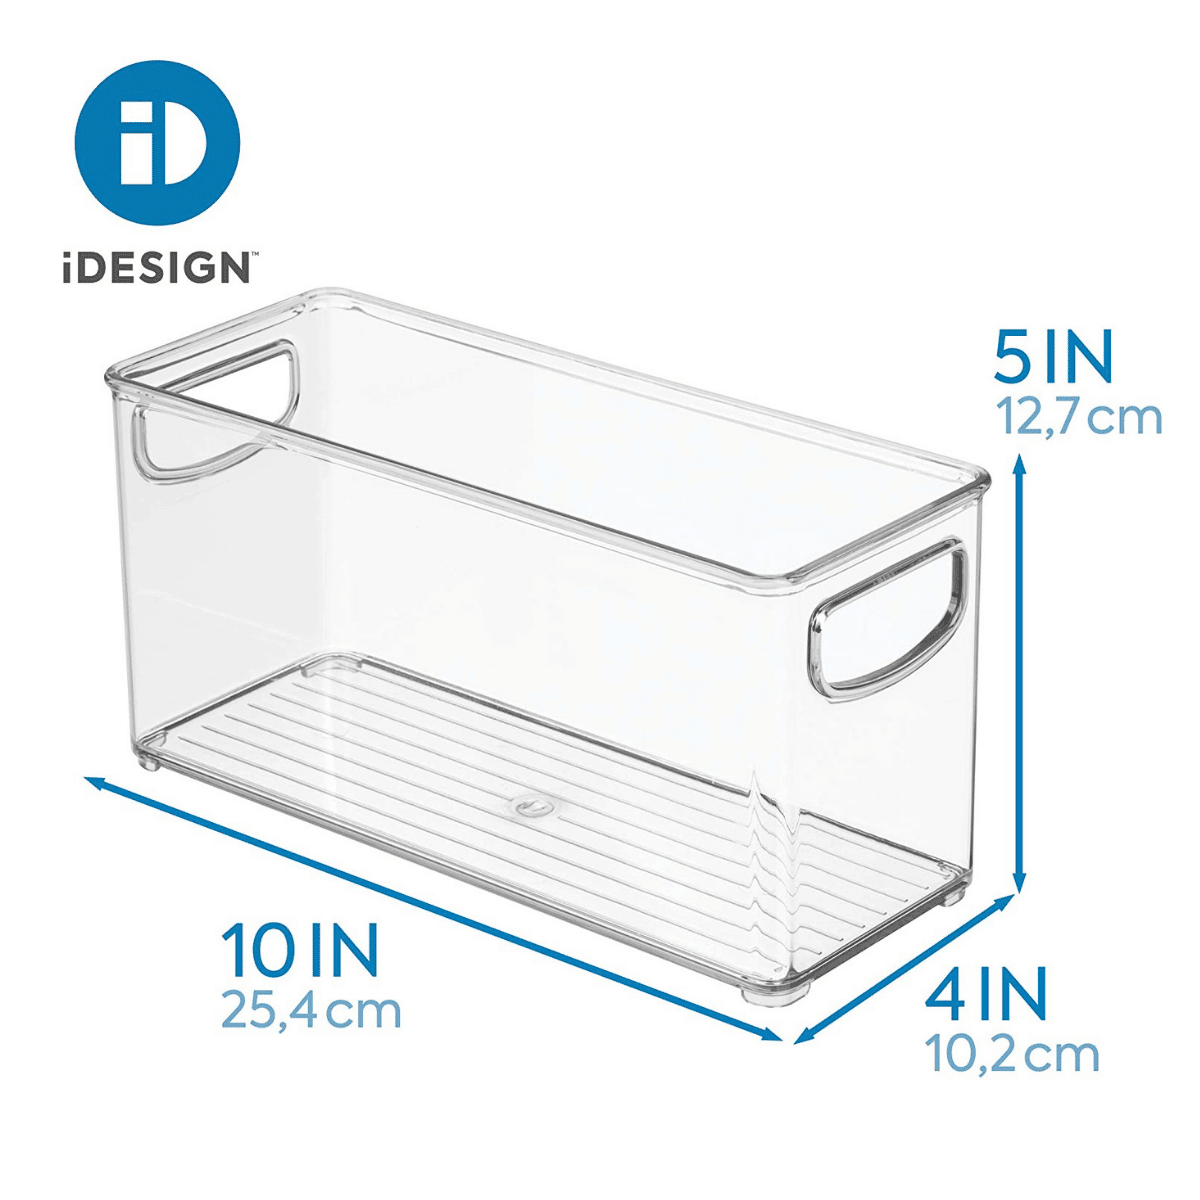 iDesign Linus BPA-Free Plastic Stackable Organizer Storage Bin with Handles  for Kitchen, Pantry, Bathroom, Small – Healthier Spaces Organizing